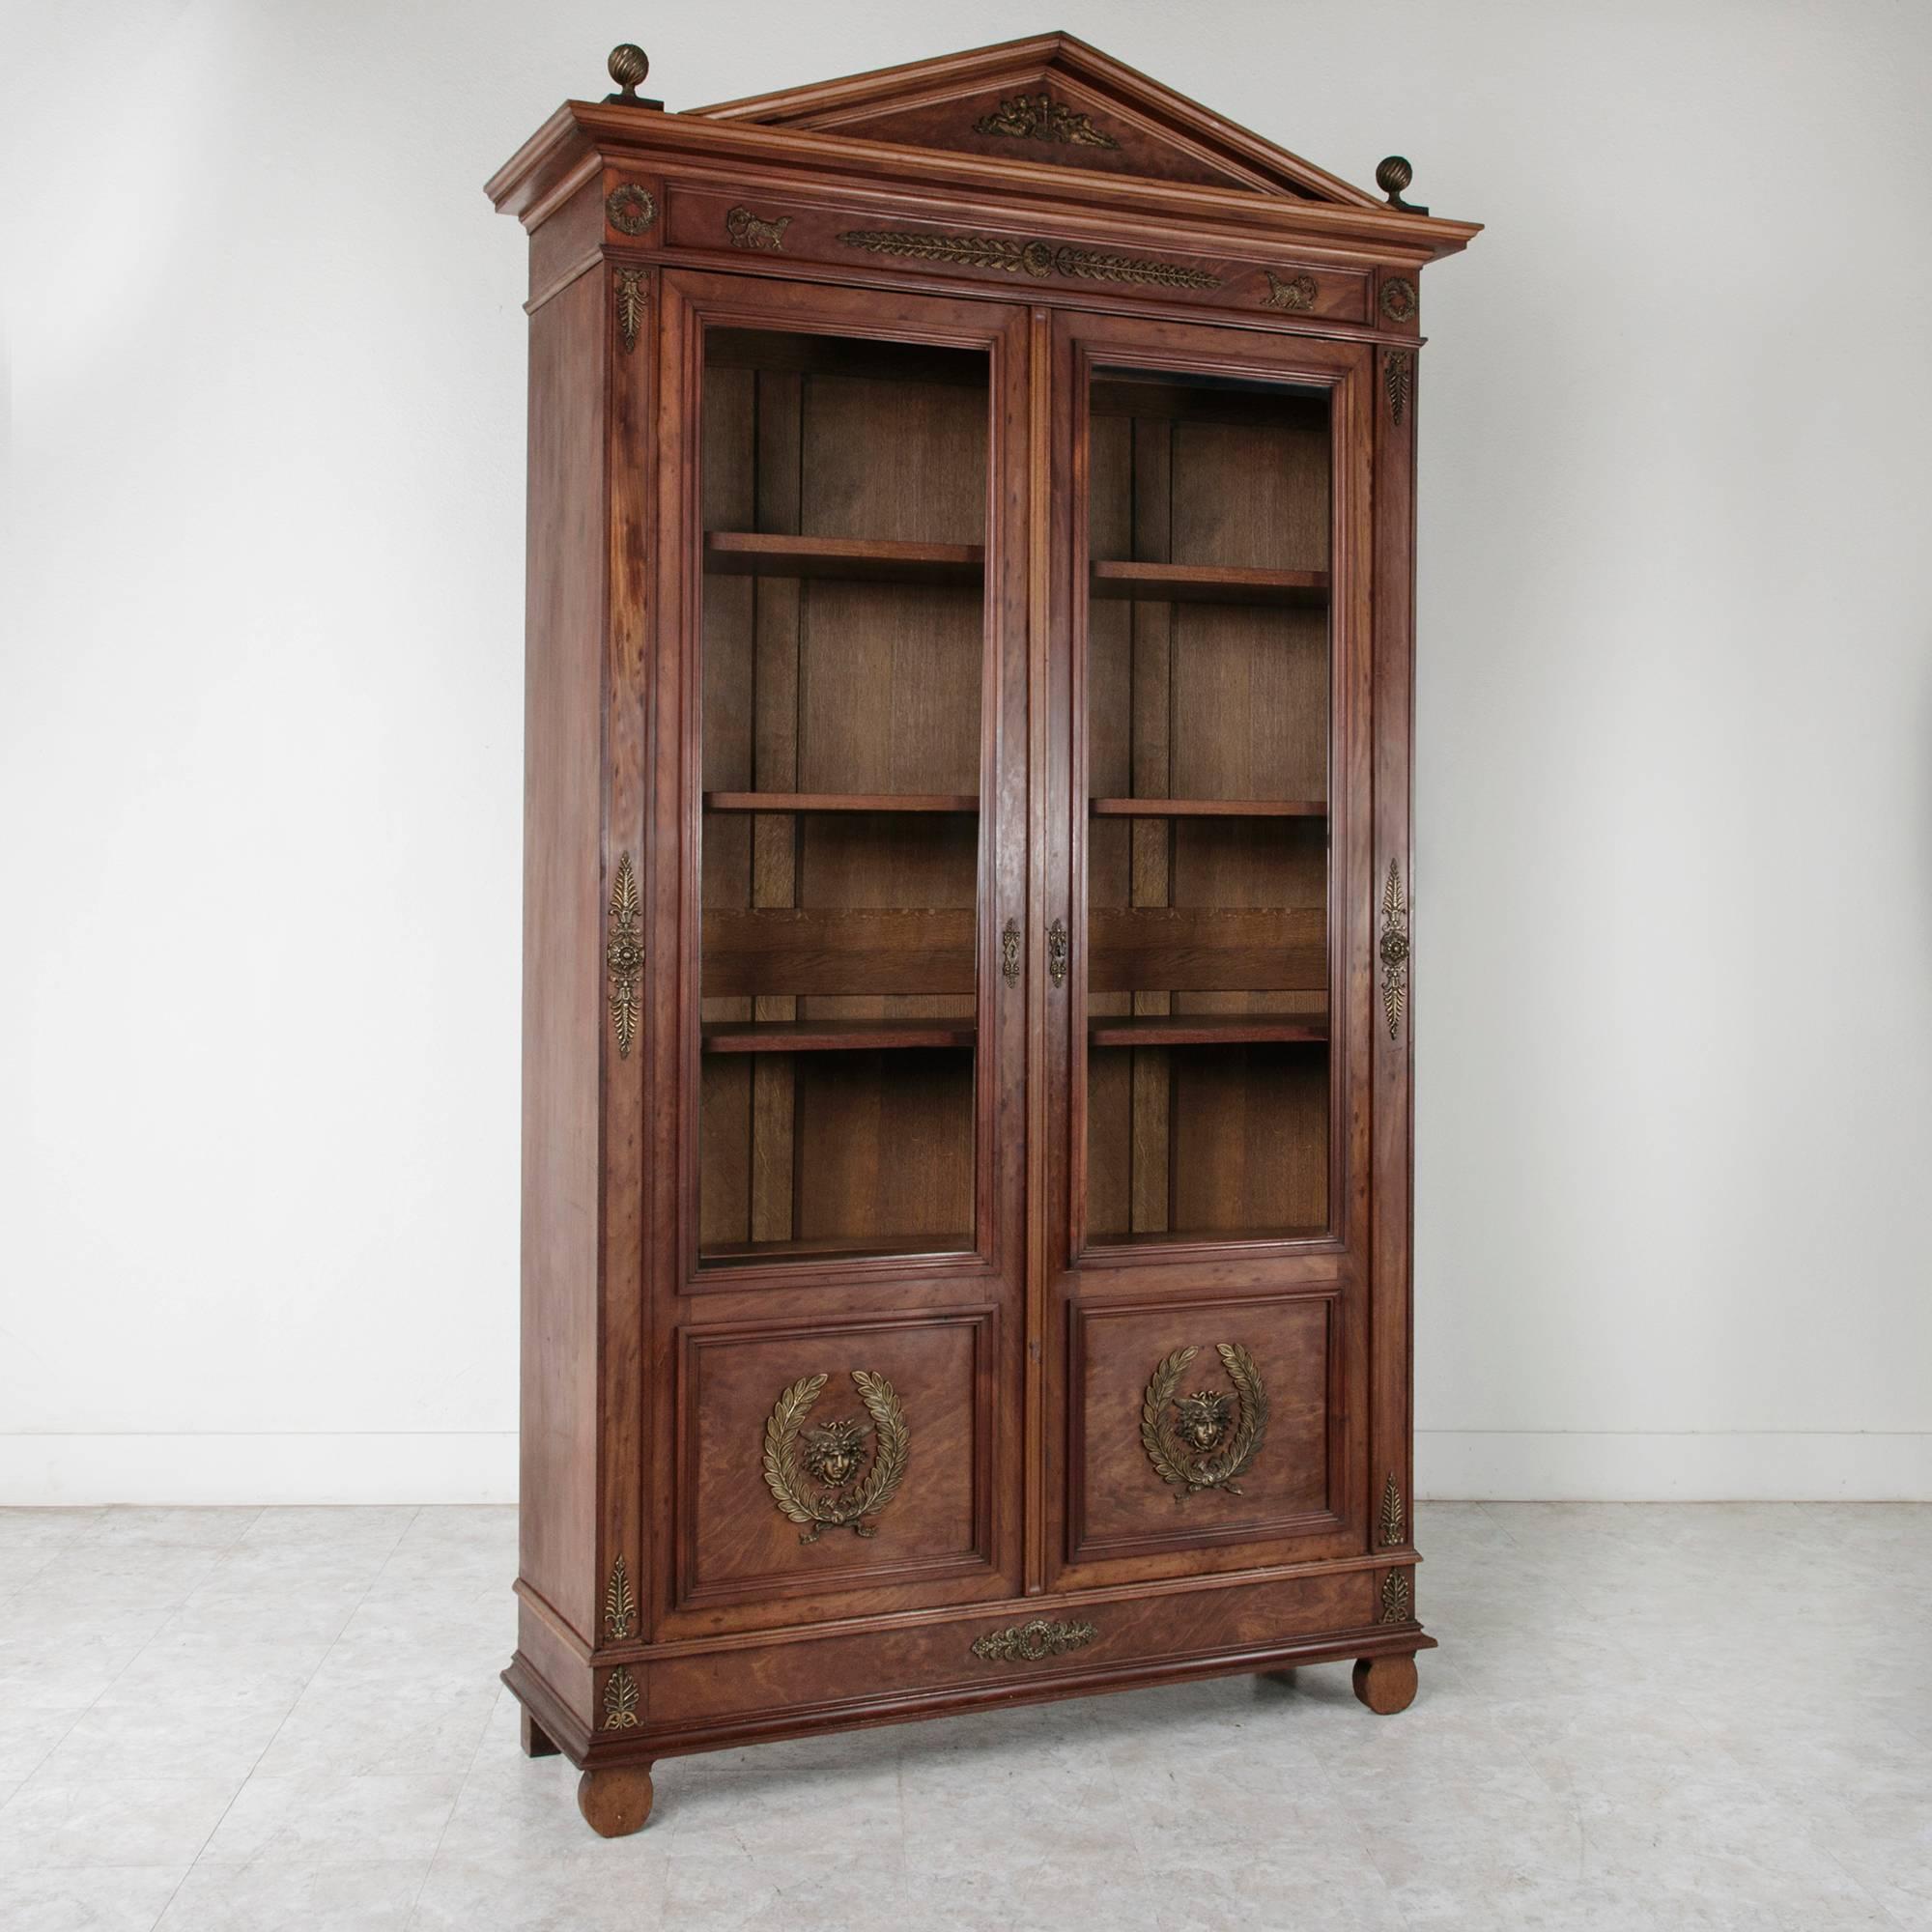 Tall Directoire and Empire Plum Pudding Mahogany Bibliotheque Bookcase Cabinet 1